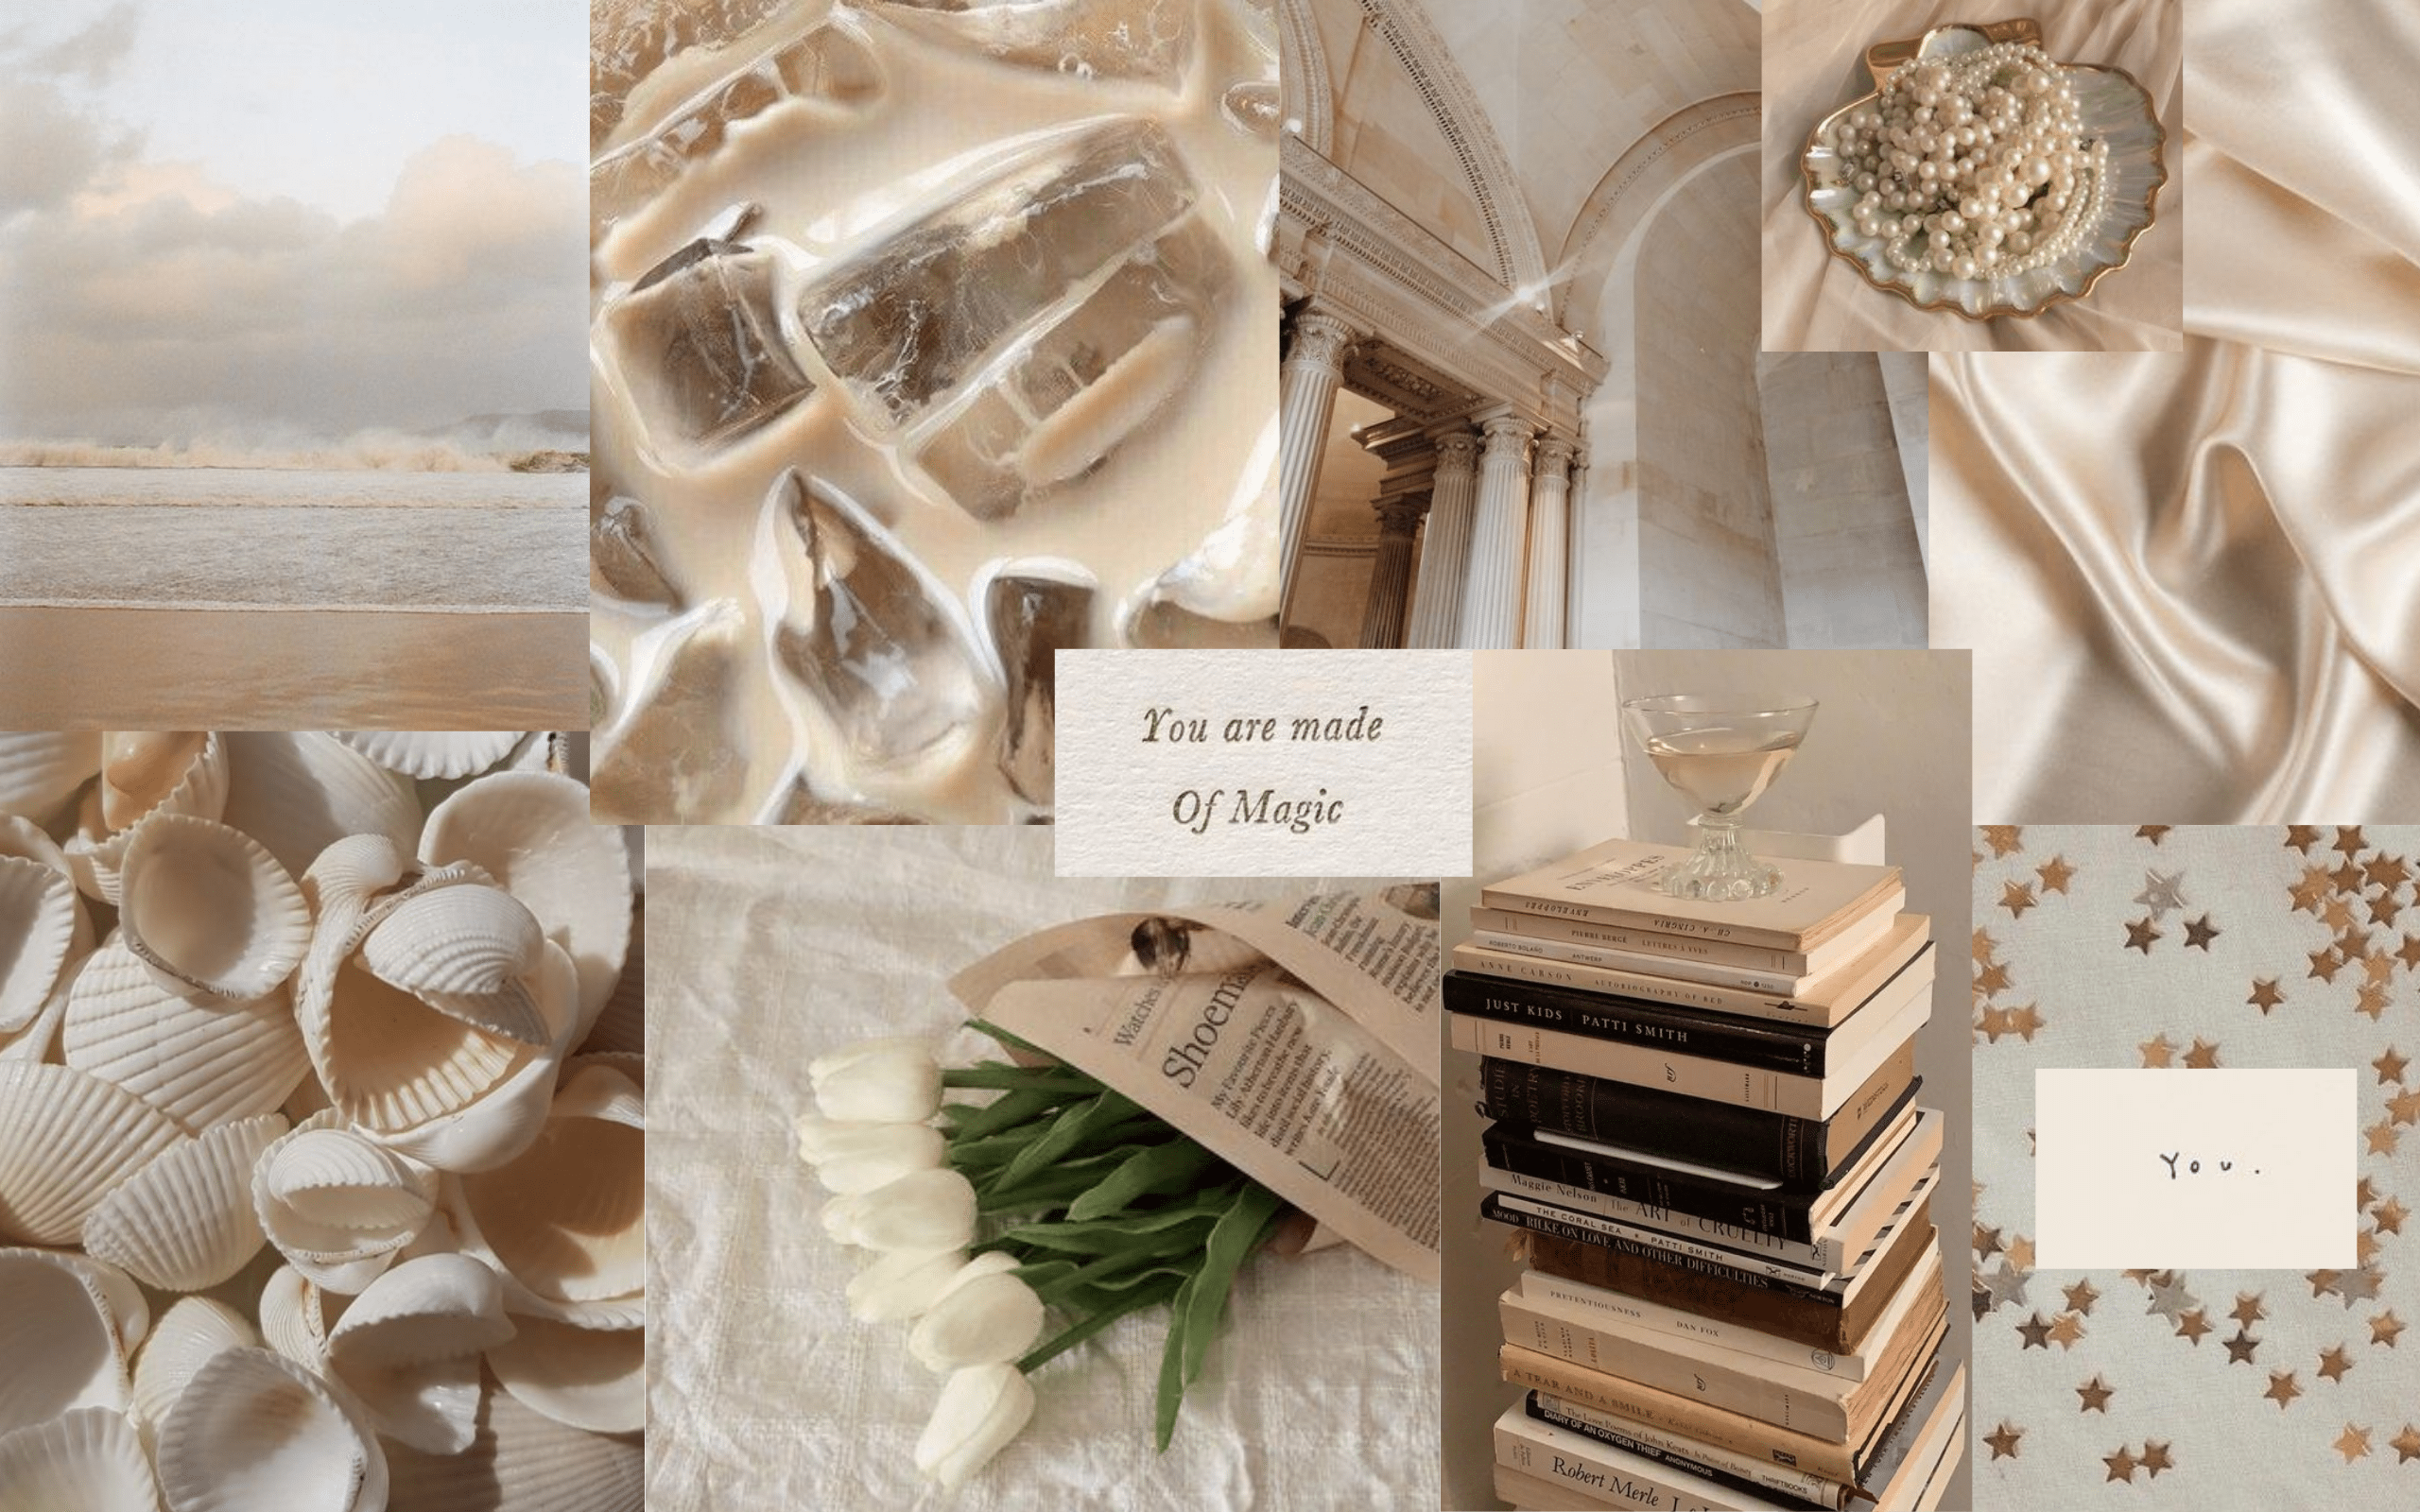 A collage of beige and cream aesthetic images including books, flowers, and wine. - Beige